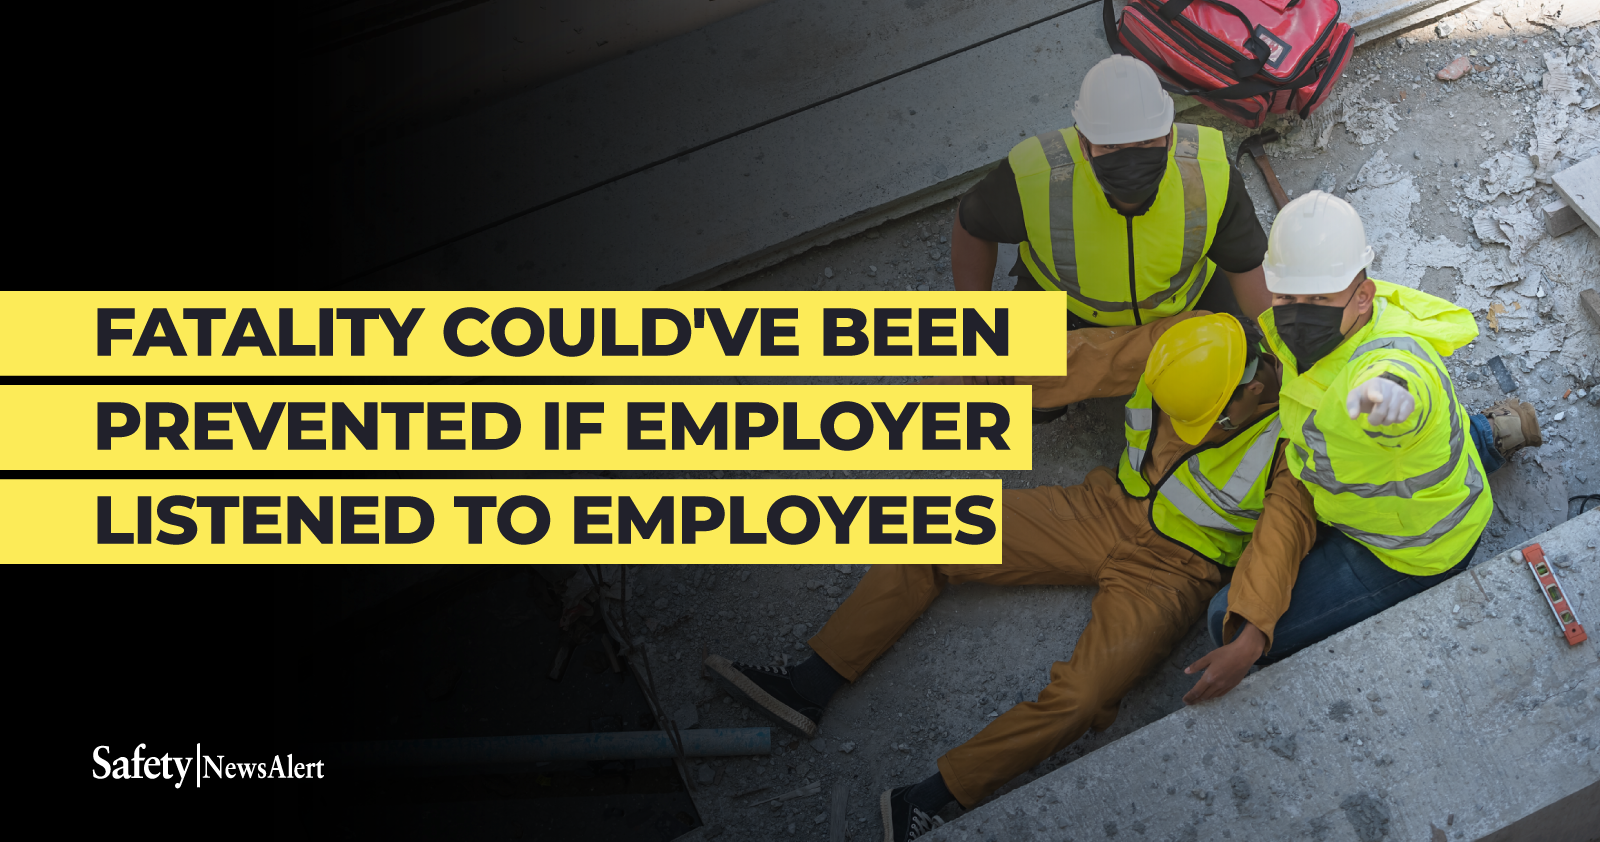 Fatality could've been prevented if employer listened to employees